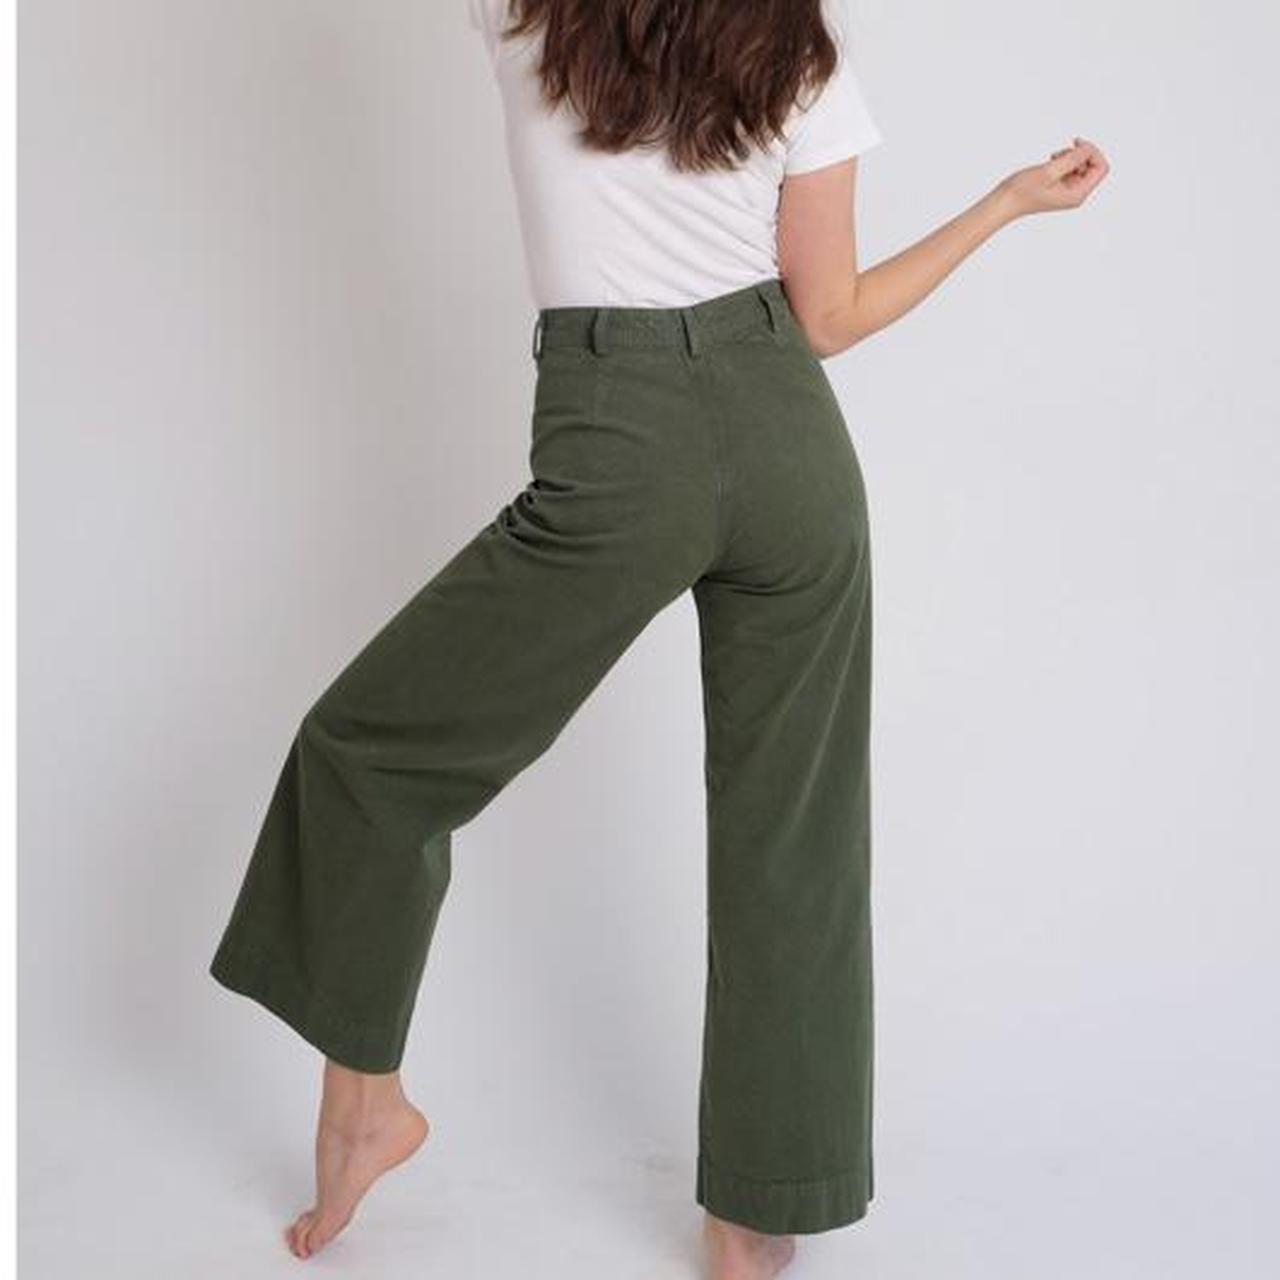 Women's Green and Khaki Jeans (2)